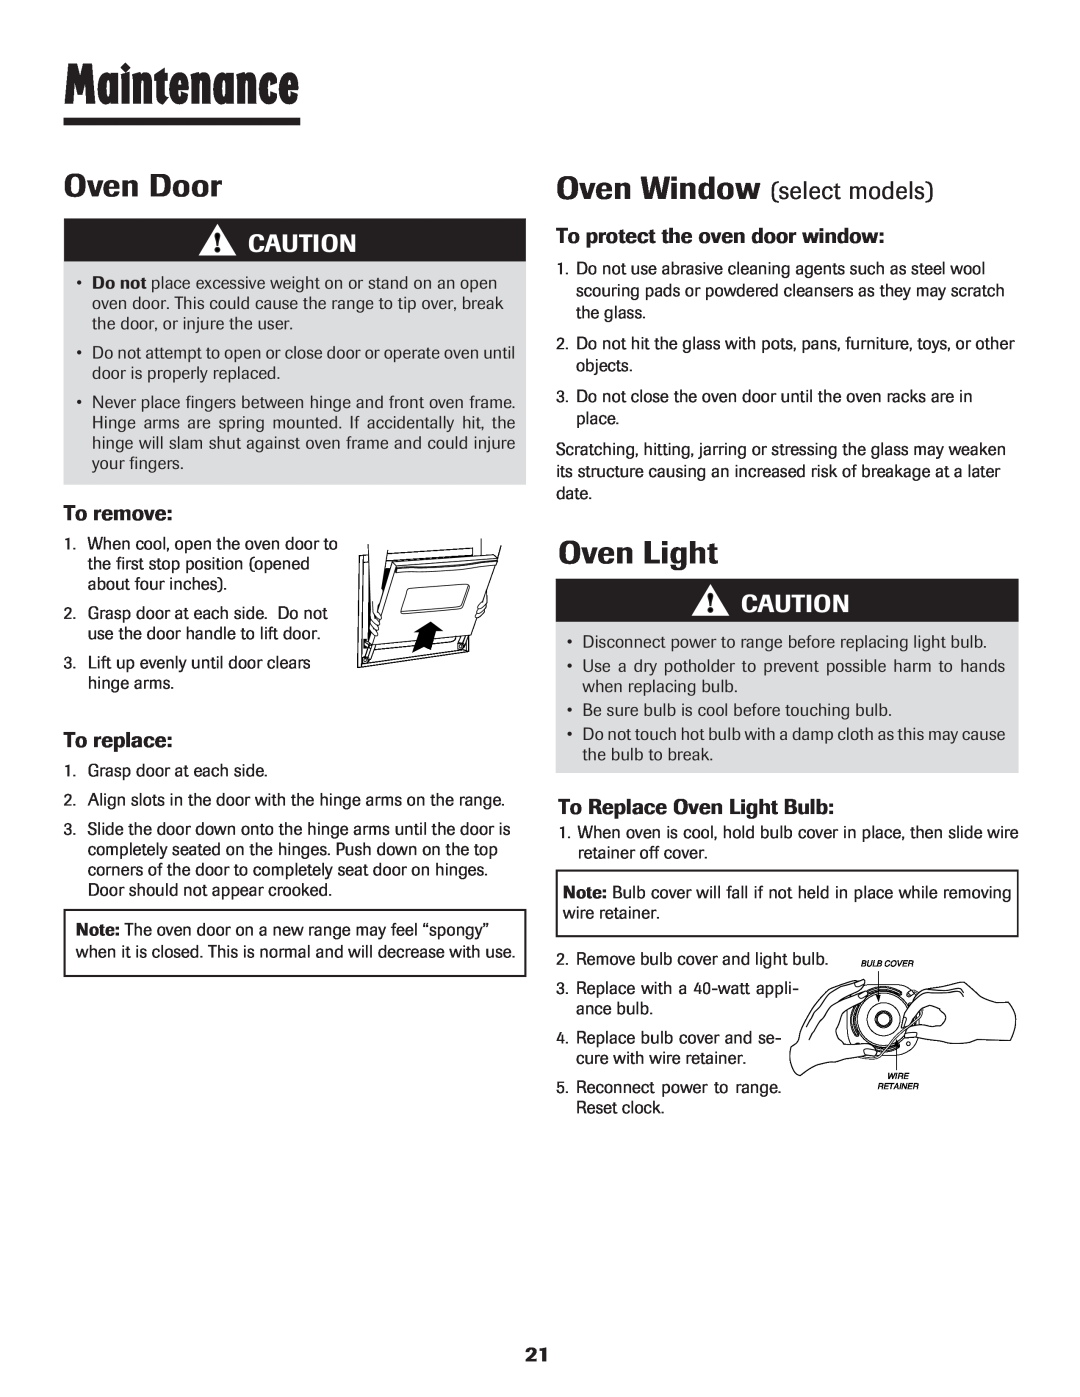 Maytag Maintenance, Oven Door, Oven Window select models, To protect the oven door window, To Replace Oven Light Bulb 